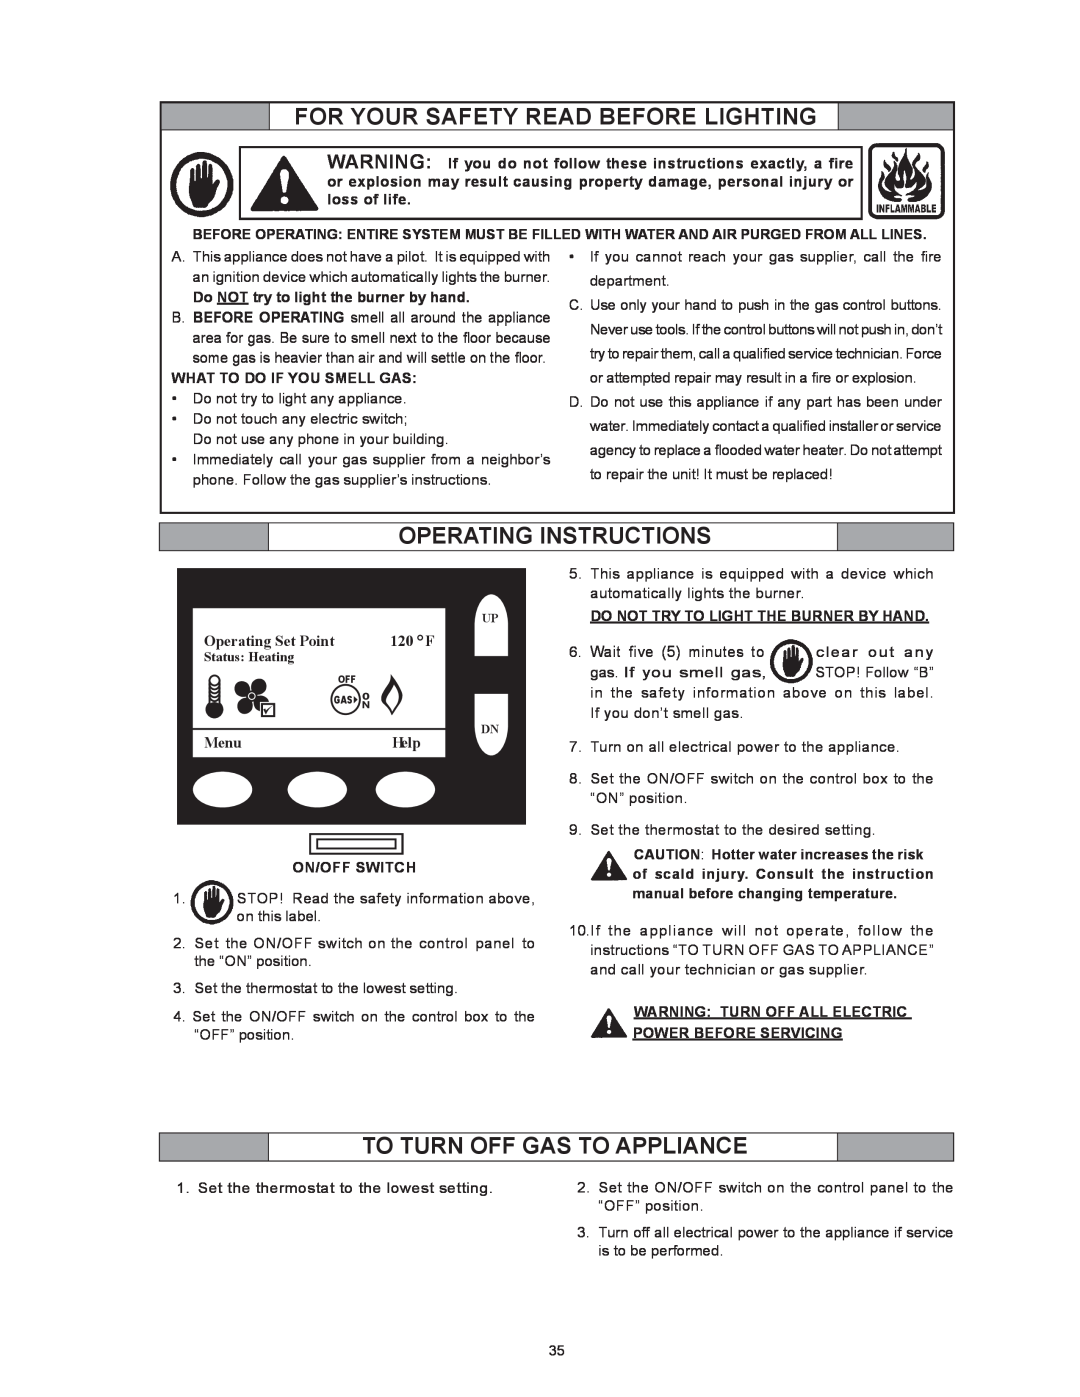 American Water Heater VG6250T100 For Your Safety Read Before Lighting, Operating Instructions, Operating Set Point, Menu 